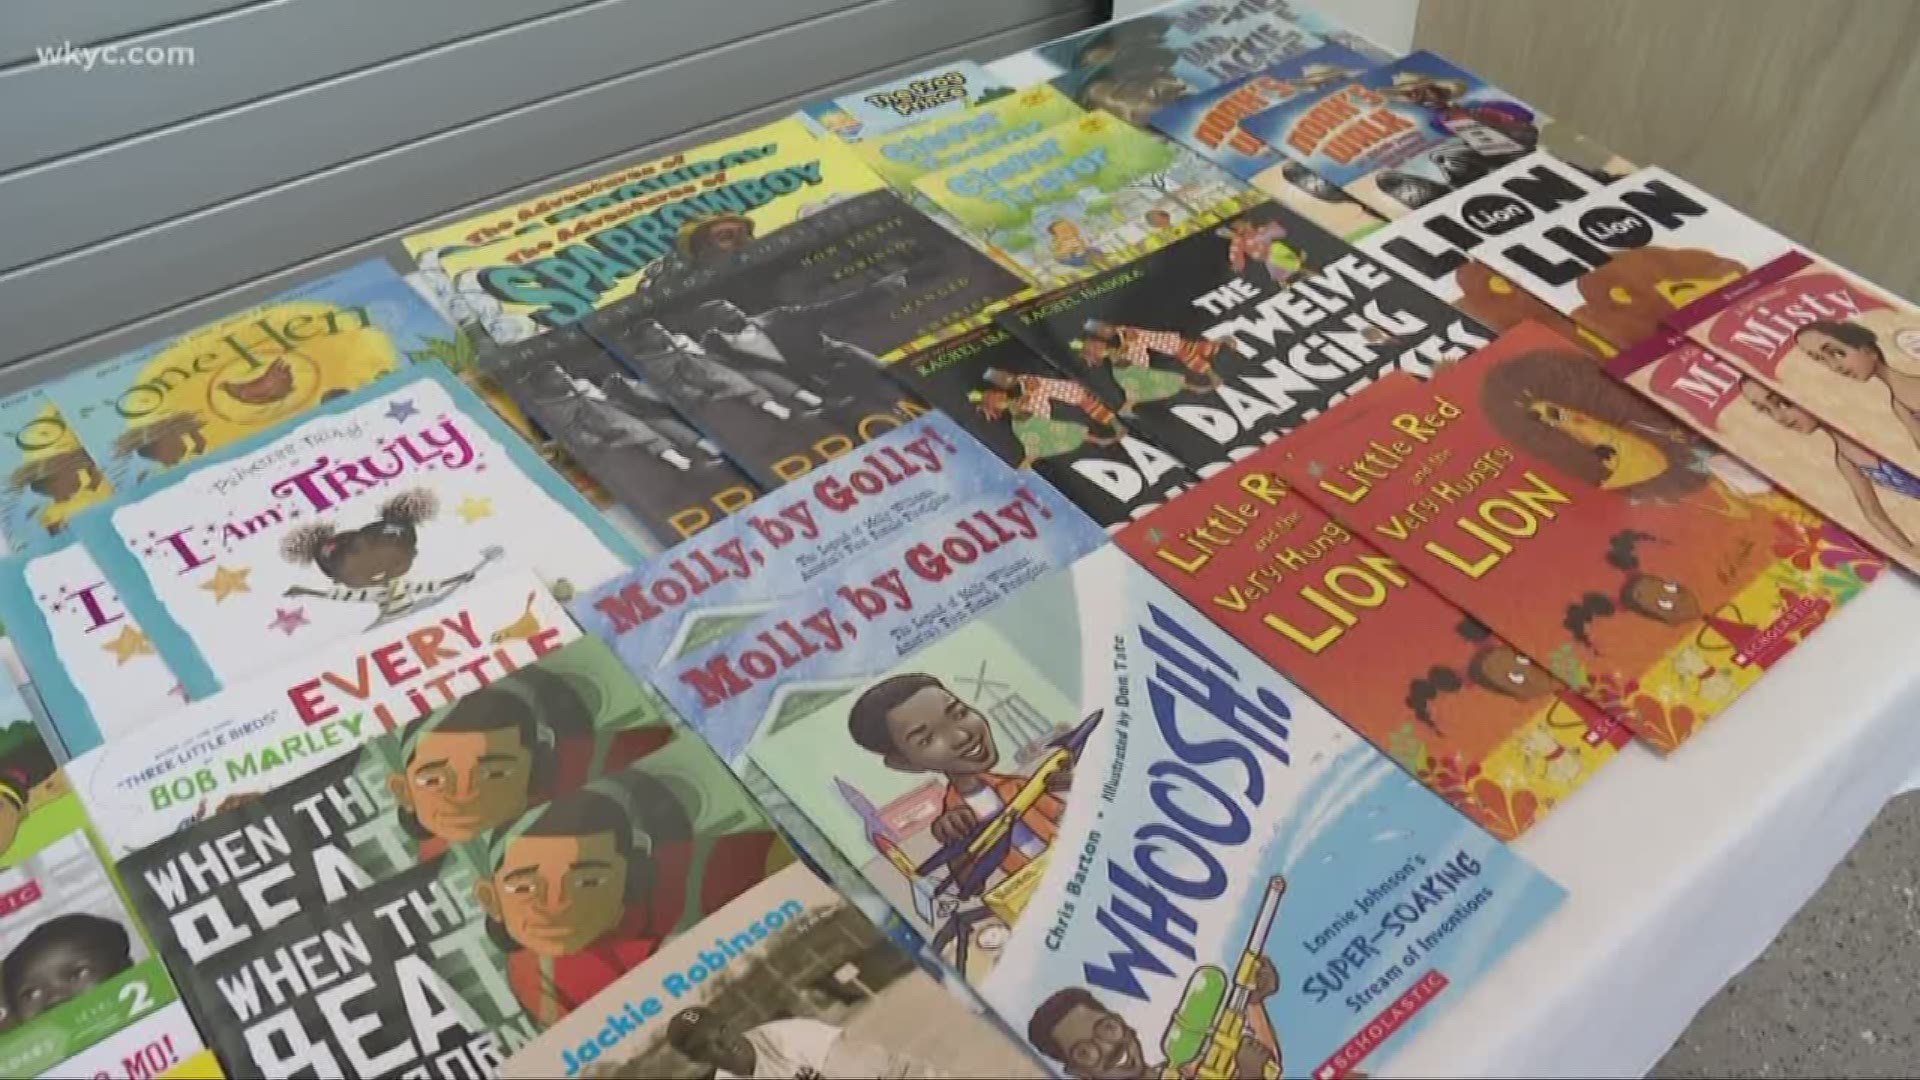 Feb. 2019: In honor of Black History Month, WKYC’s Dorsena Drakeford took part in an 'African American Read-In' at the Salvation Army Cleveland Temple in Cleveland’s Collinwood neighborhood.